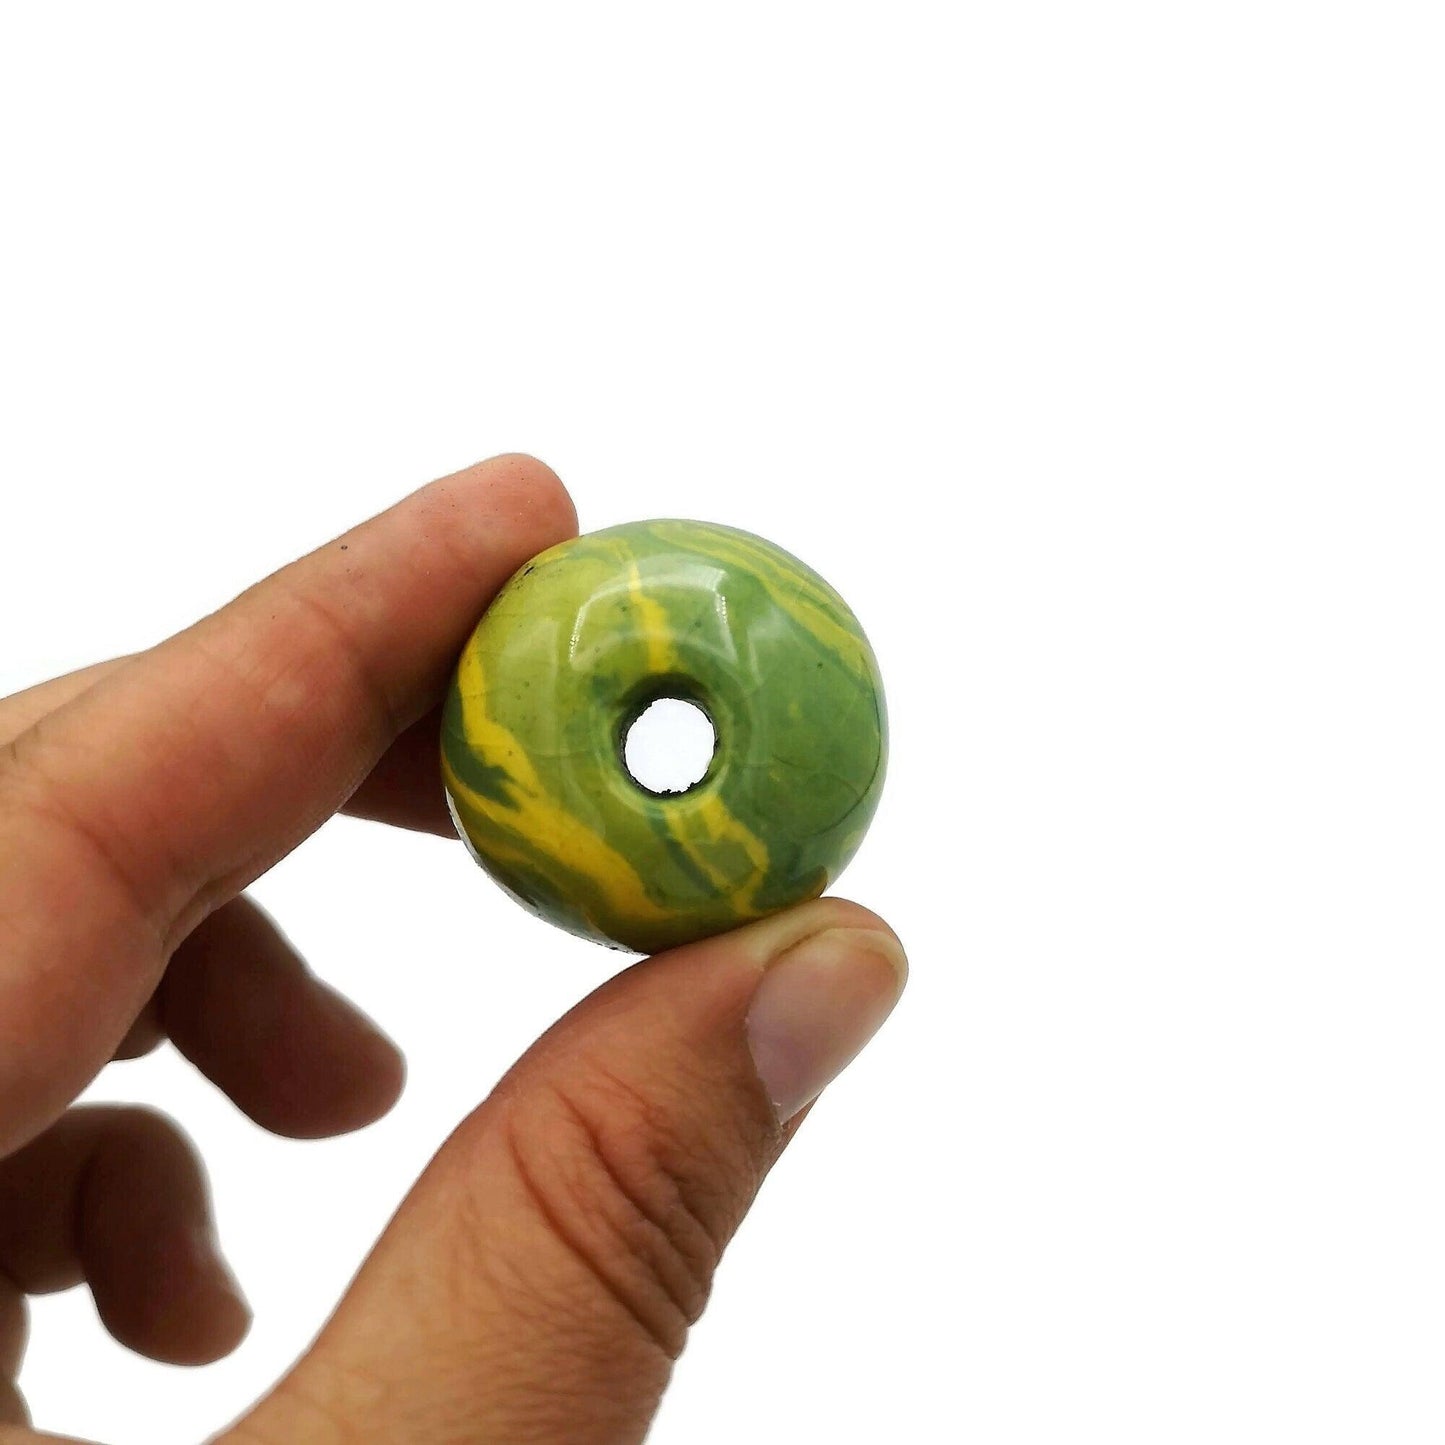 1Pc Handmade Ceramic Macrame Beads 7mm Large Hole, Marbled Green And Yellow Clay Beads, Extra Large Beads 30mm - Ceramica Ana Rafael